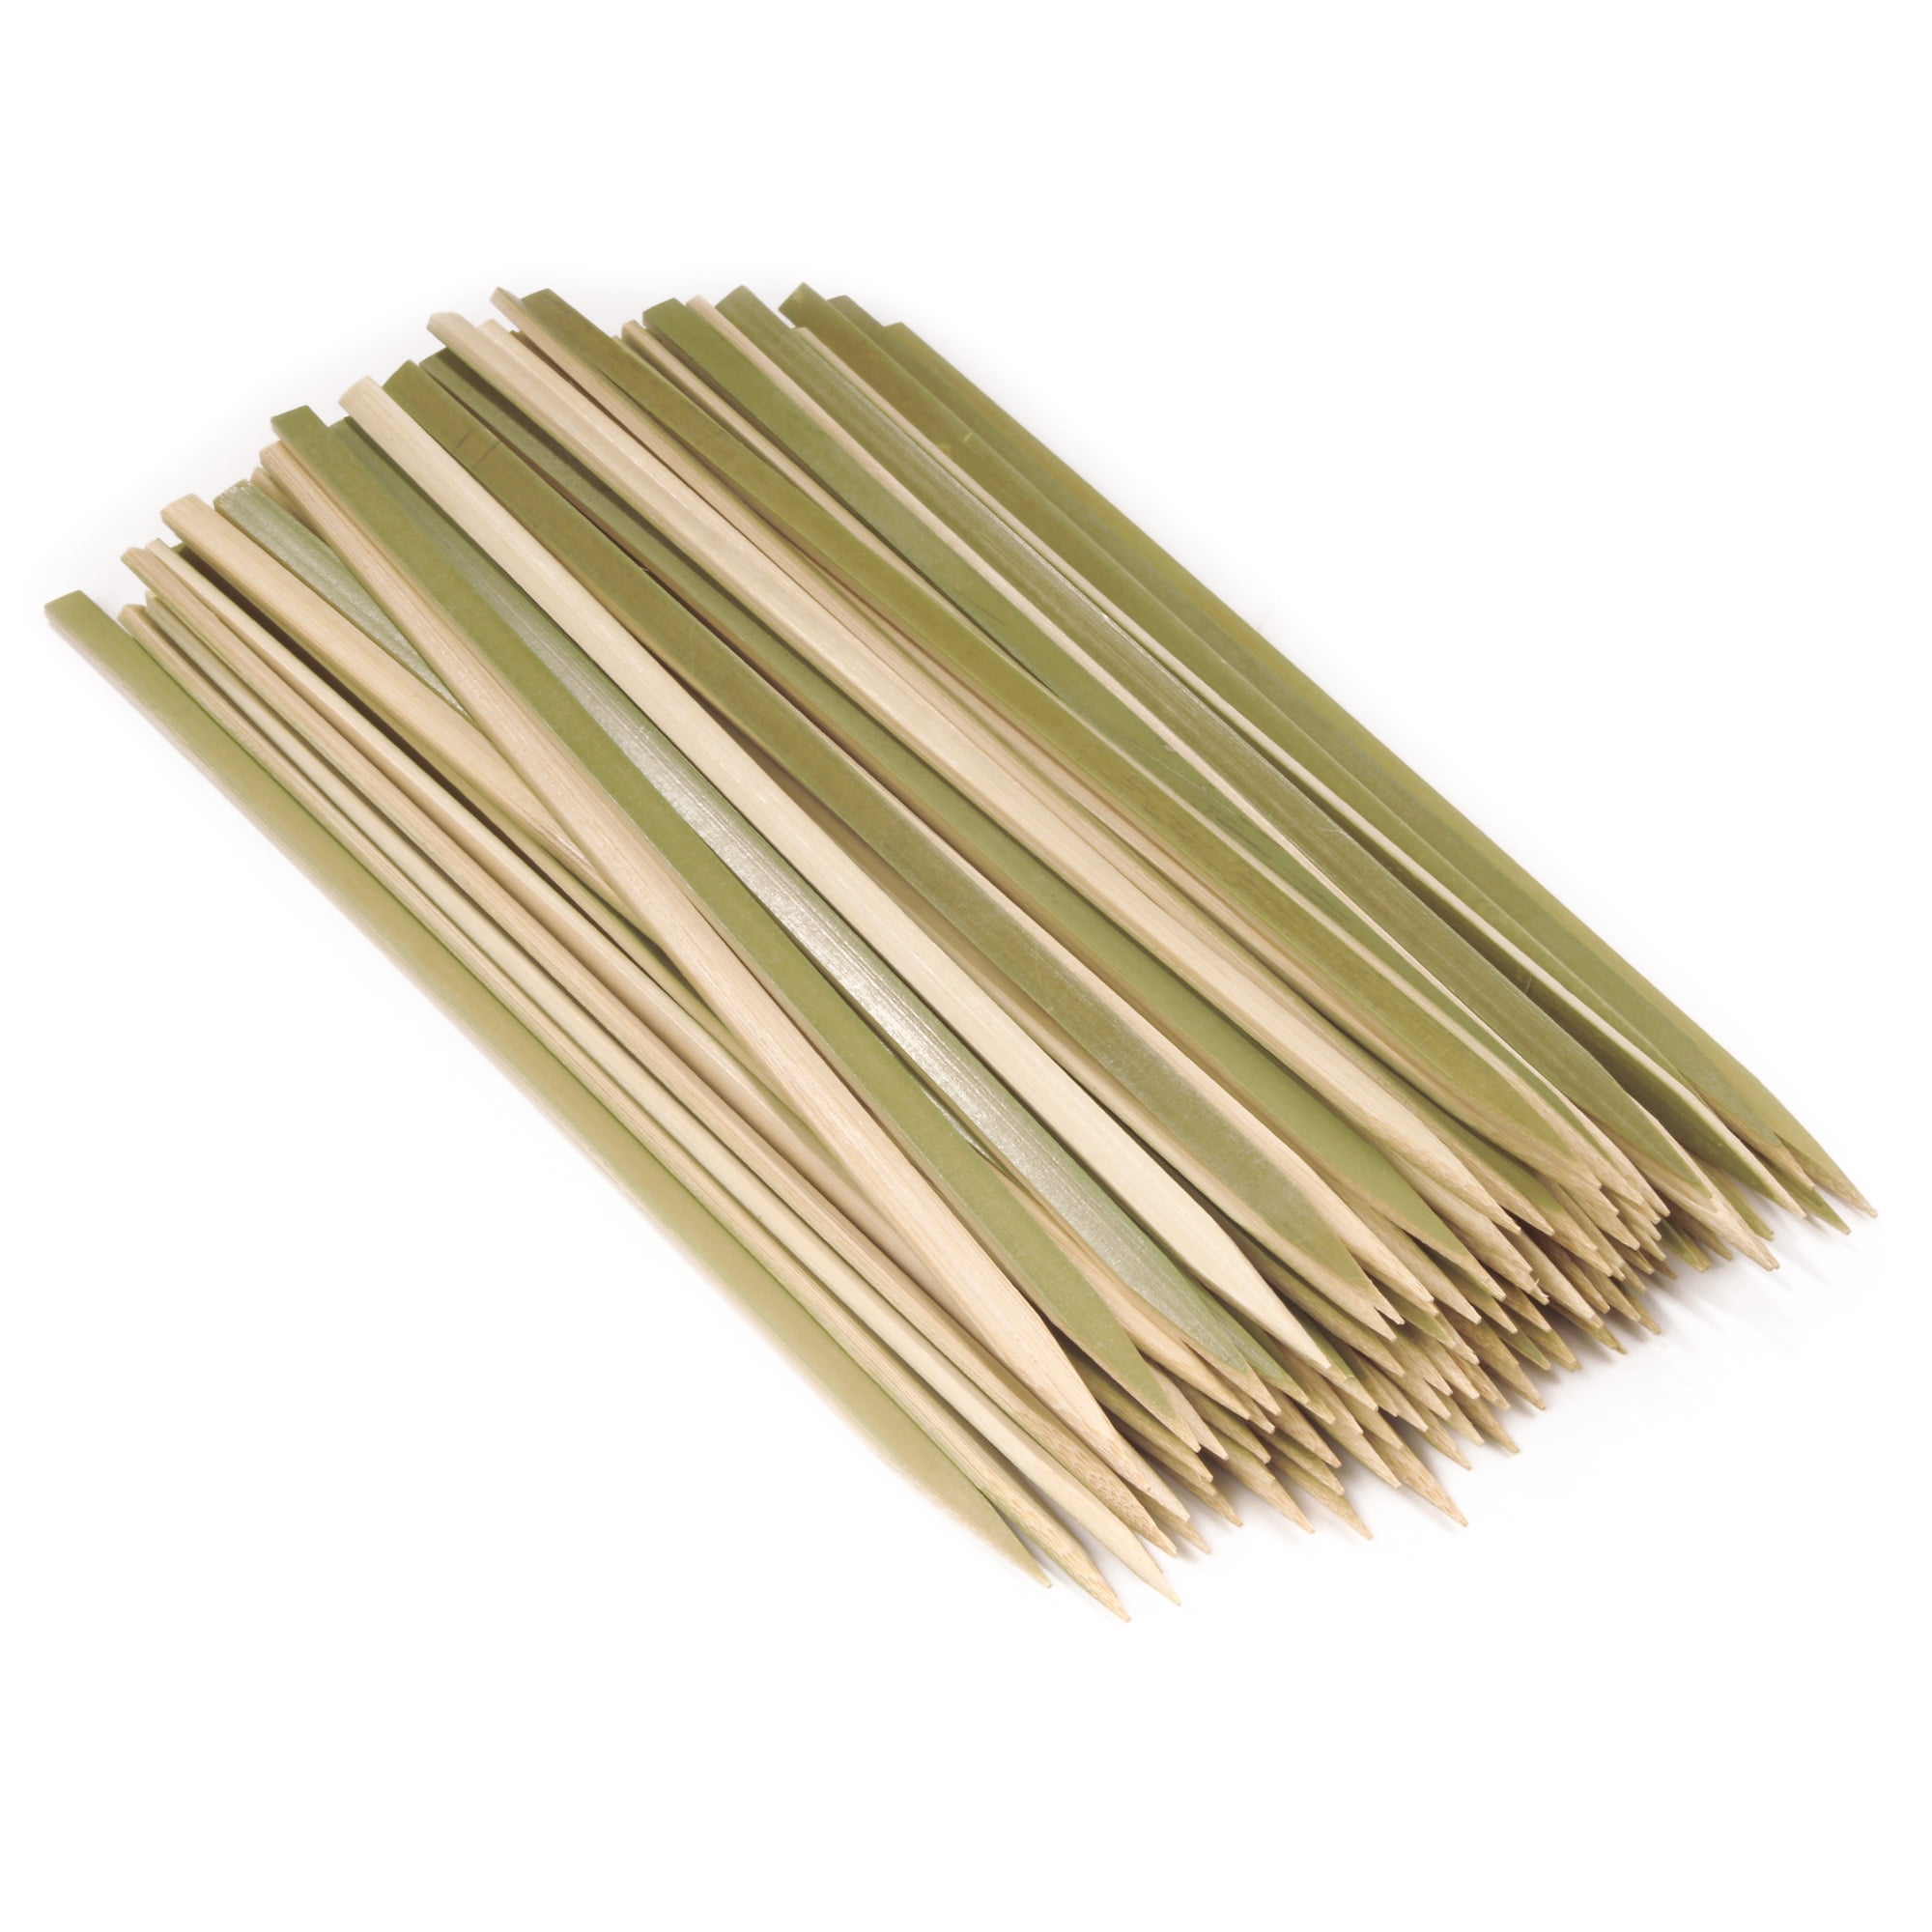 Oriental Creations Premium 4 inch Natural Bamboo Paddle Picks Skewers 200, 4 Inches